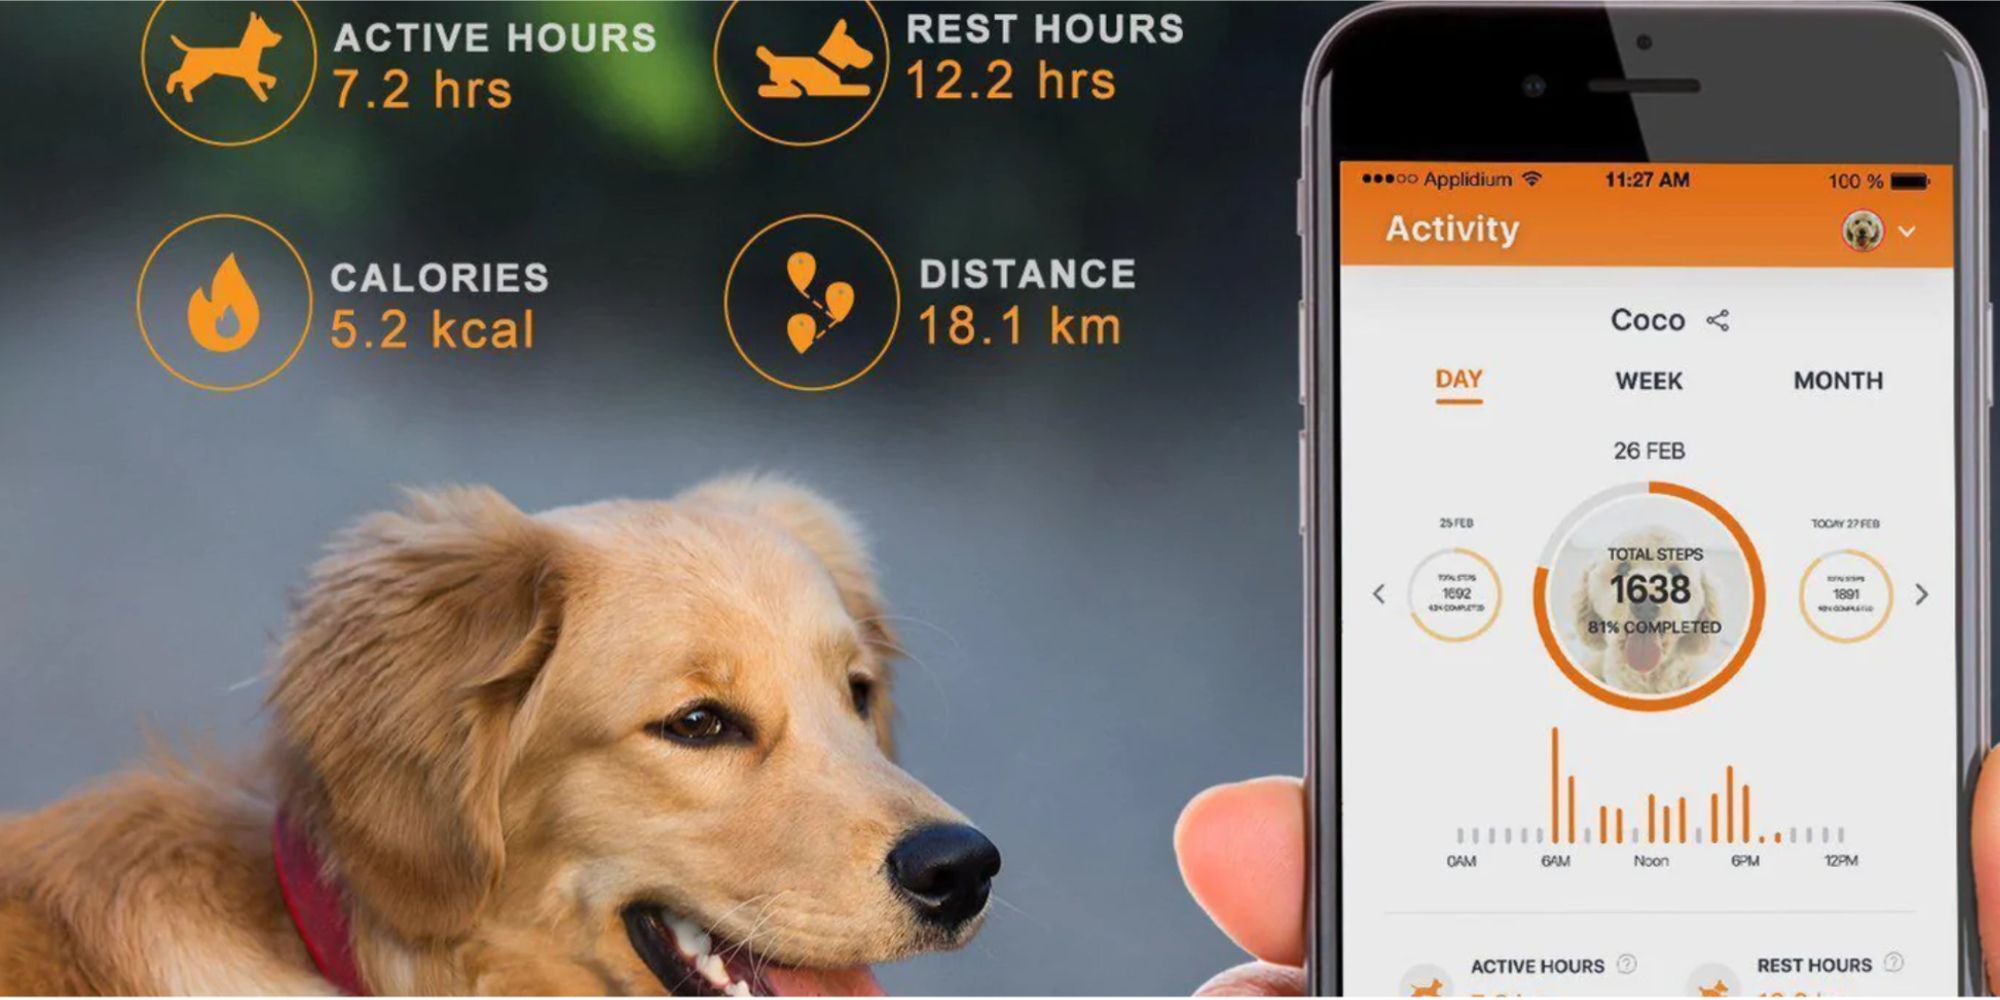 The Coco Pet Activity Monitor